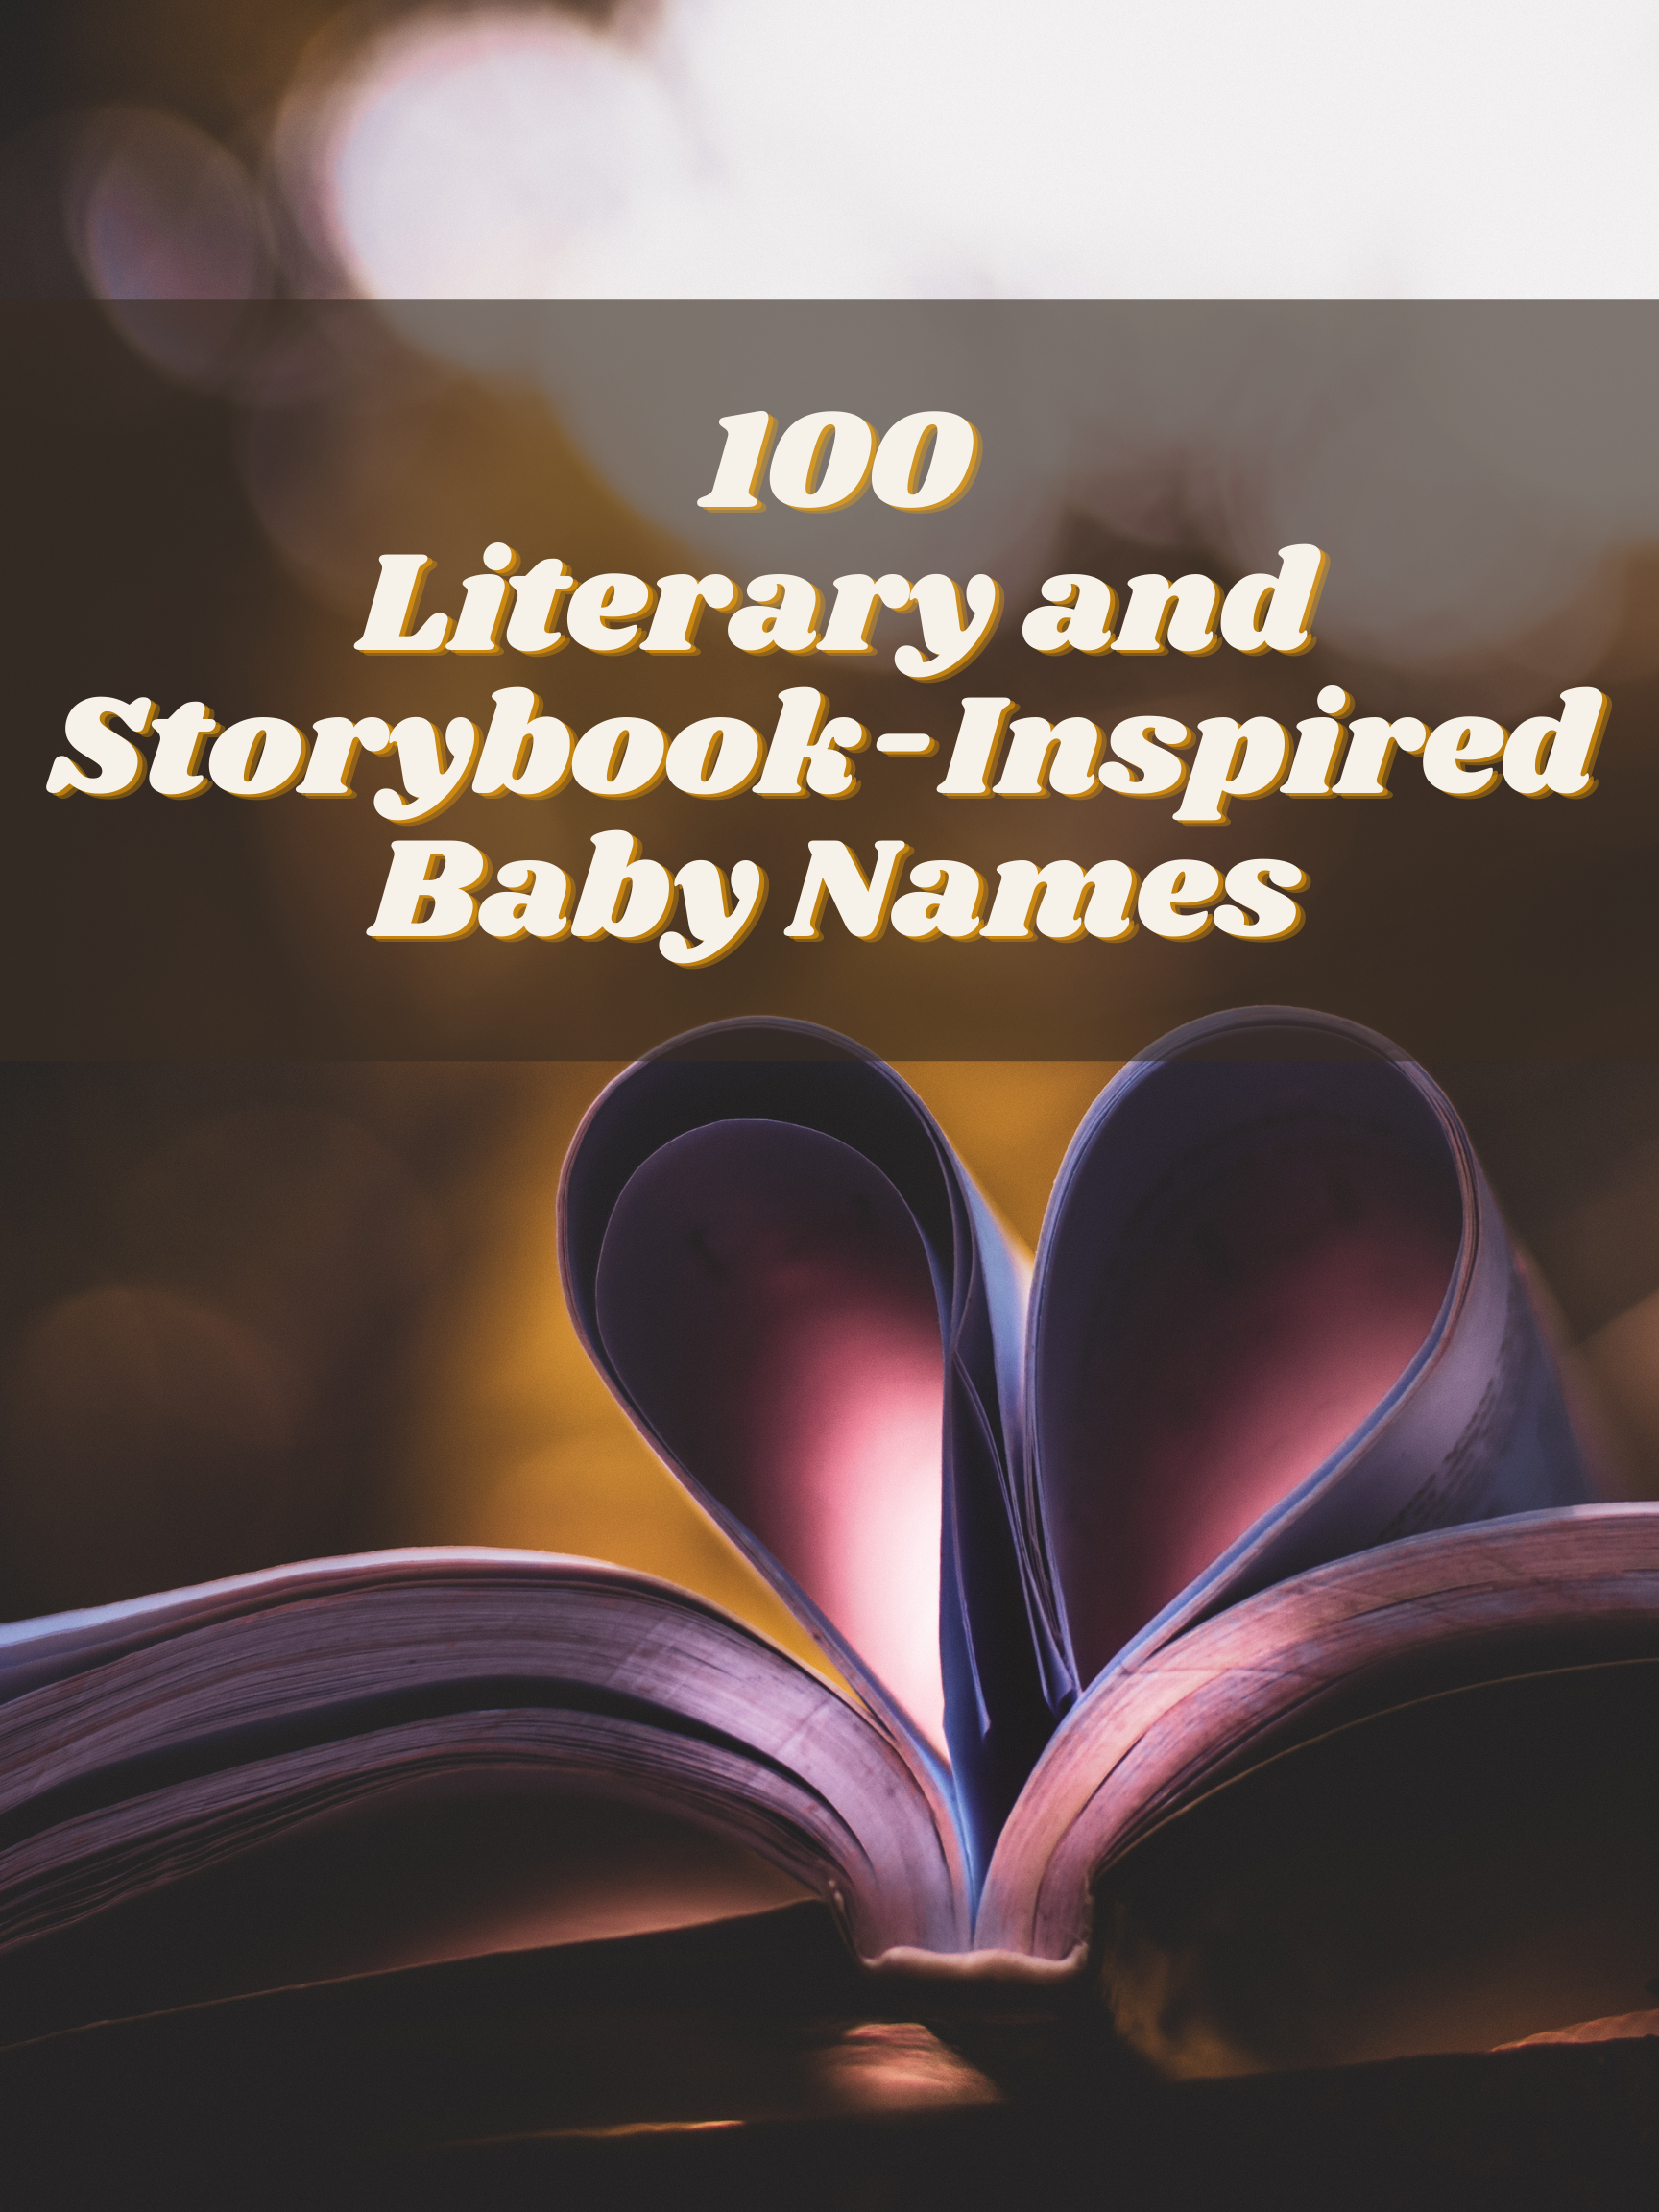 100 Literary and Storybook-Inspired Baby Names